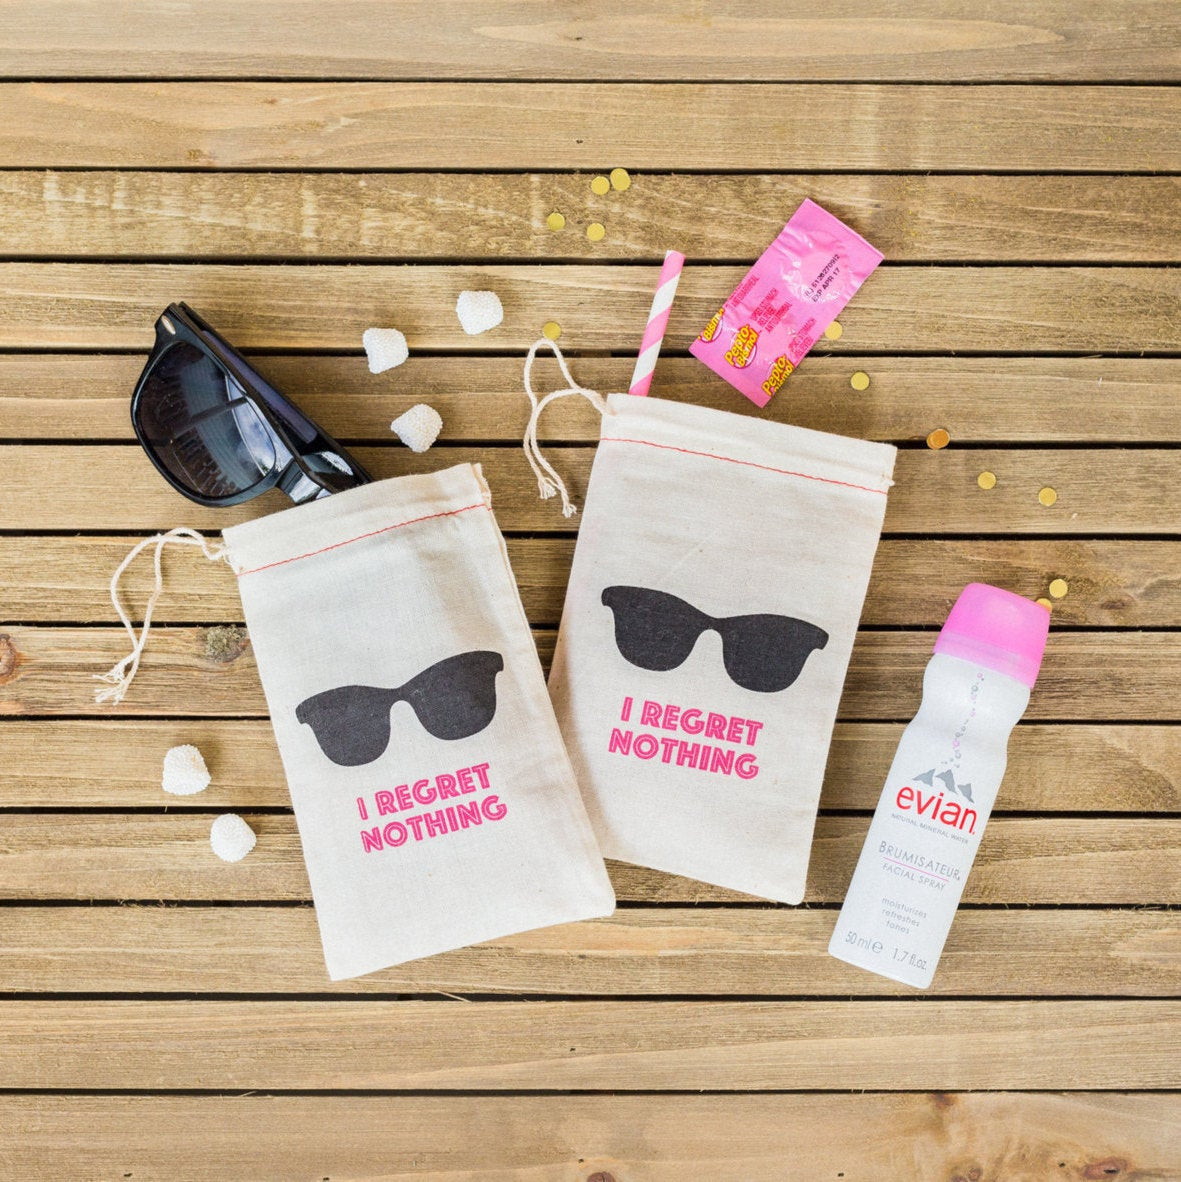 Gift Bag Ideas For Bachelorette Party
 Bachelorette Party Bags Sunglass Bachelorette Party Bags I